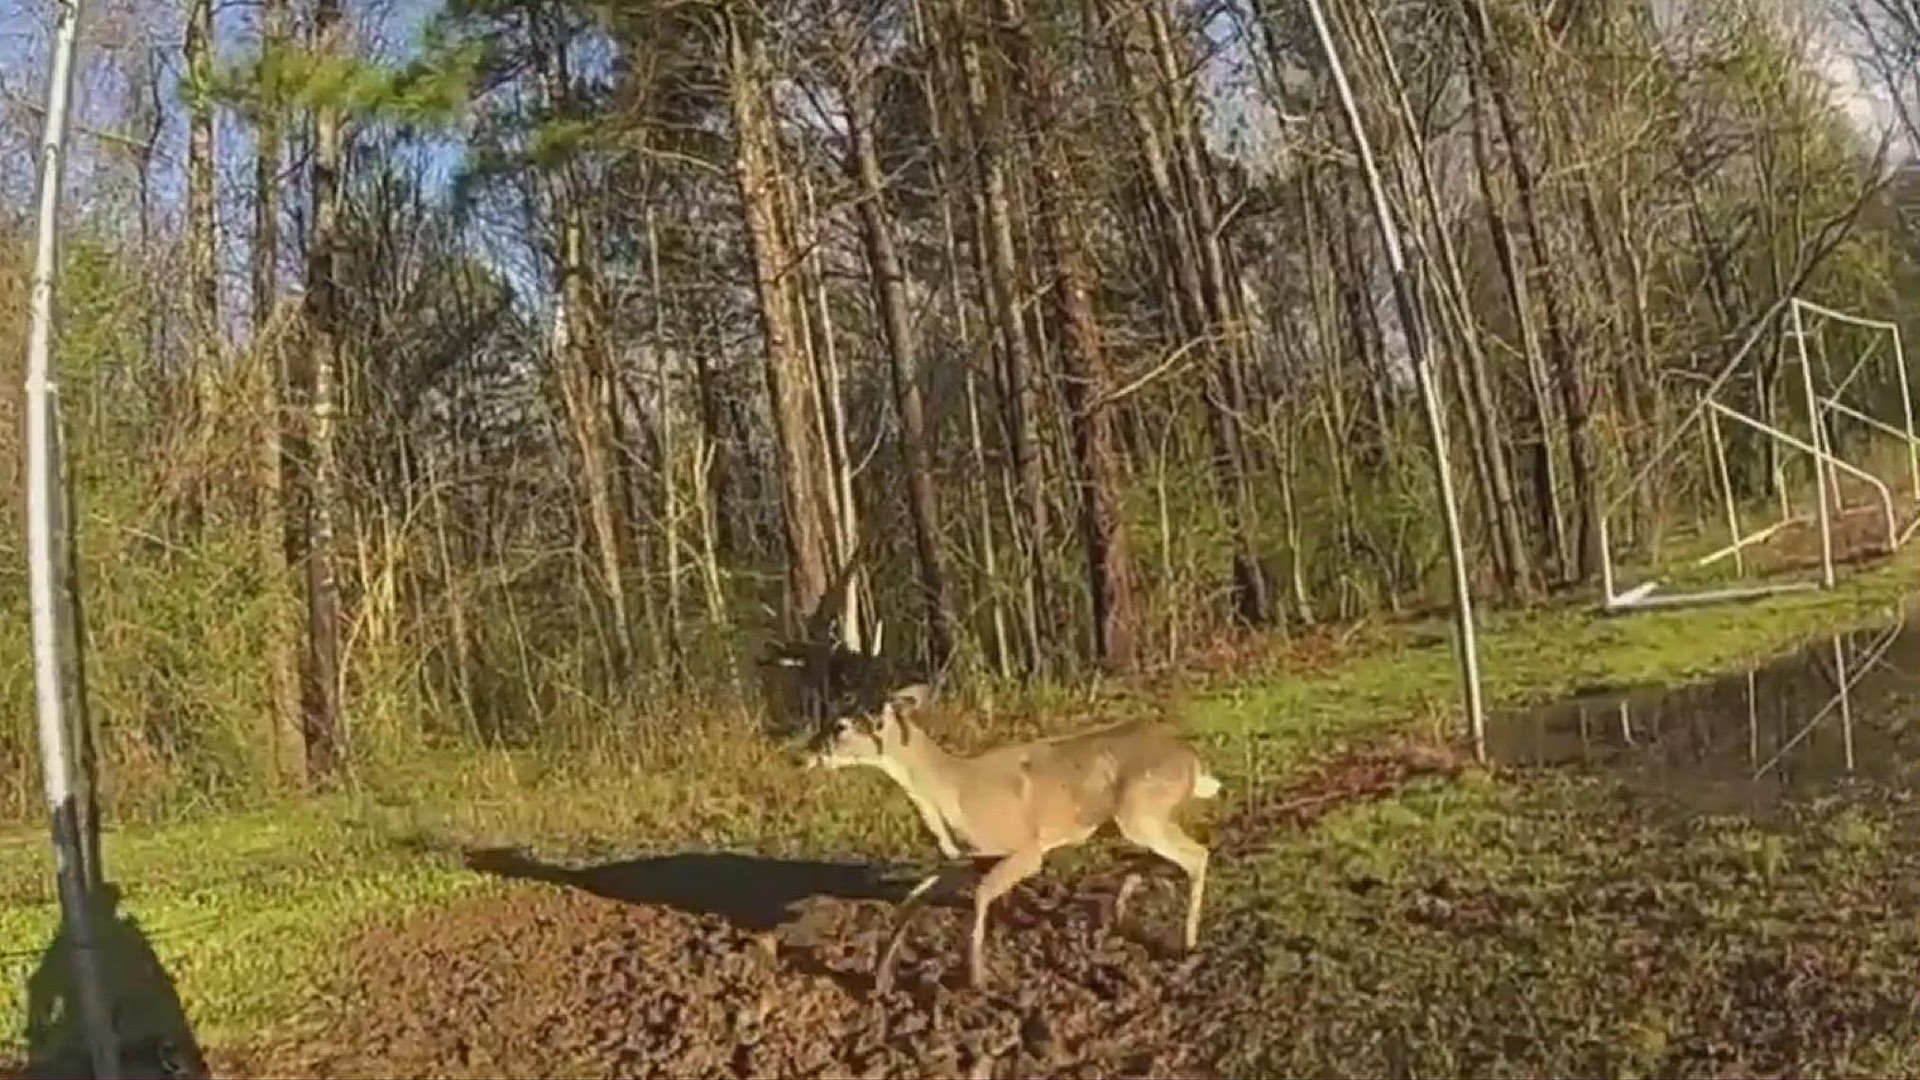 This video from Sandy Springs Police shows officers rescuing a deer in distress that was tangled in a net.